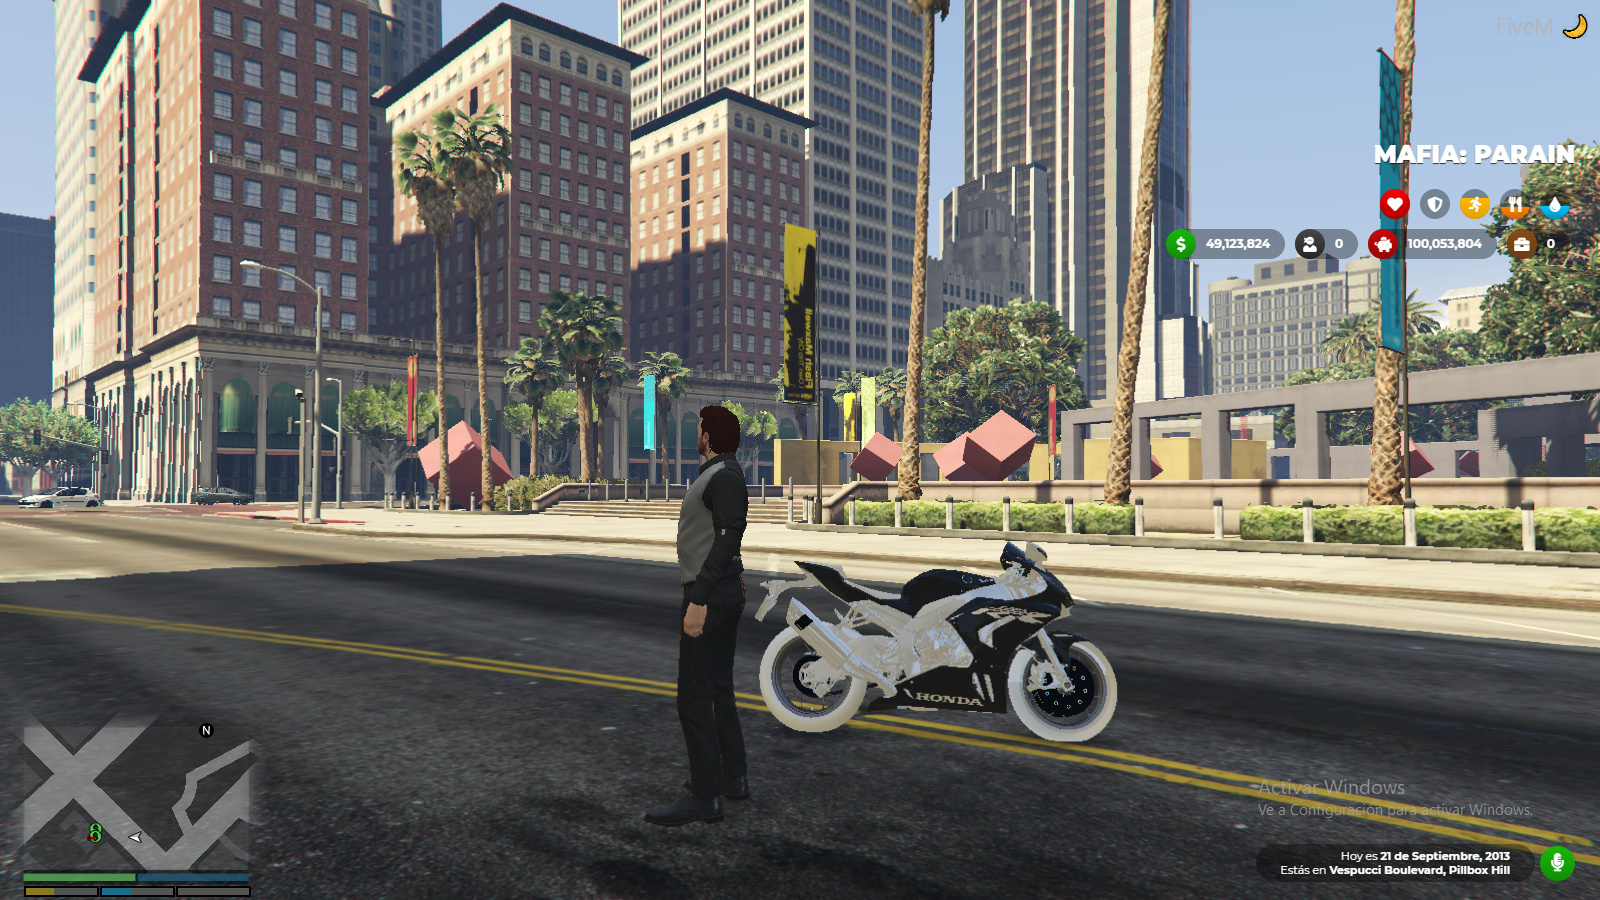 Convert a FiveM Resource into an Add-On for GTAV SP - Modding Discussion &  Information 